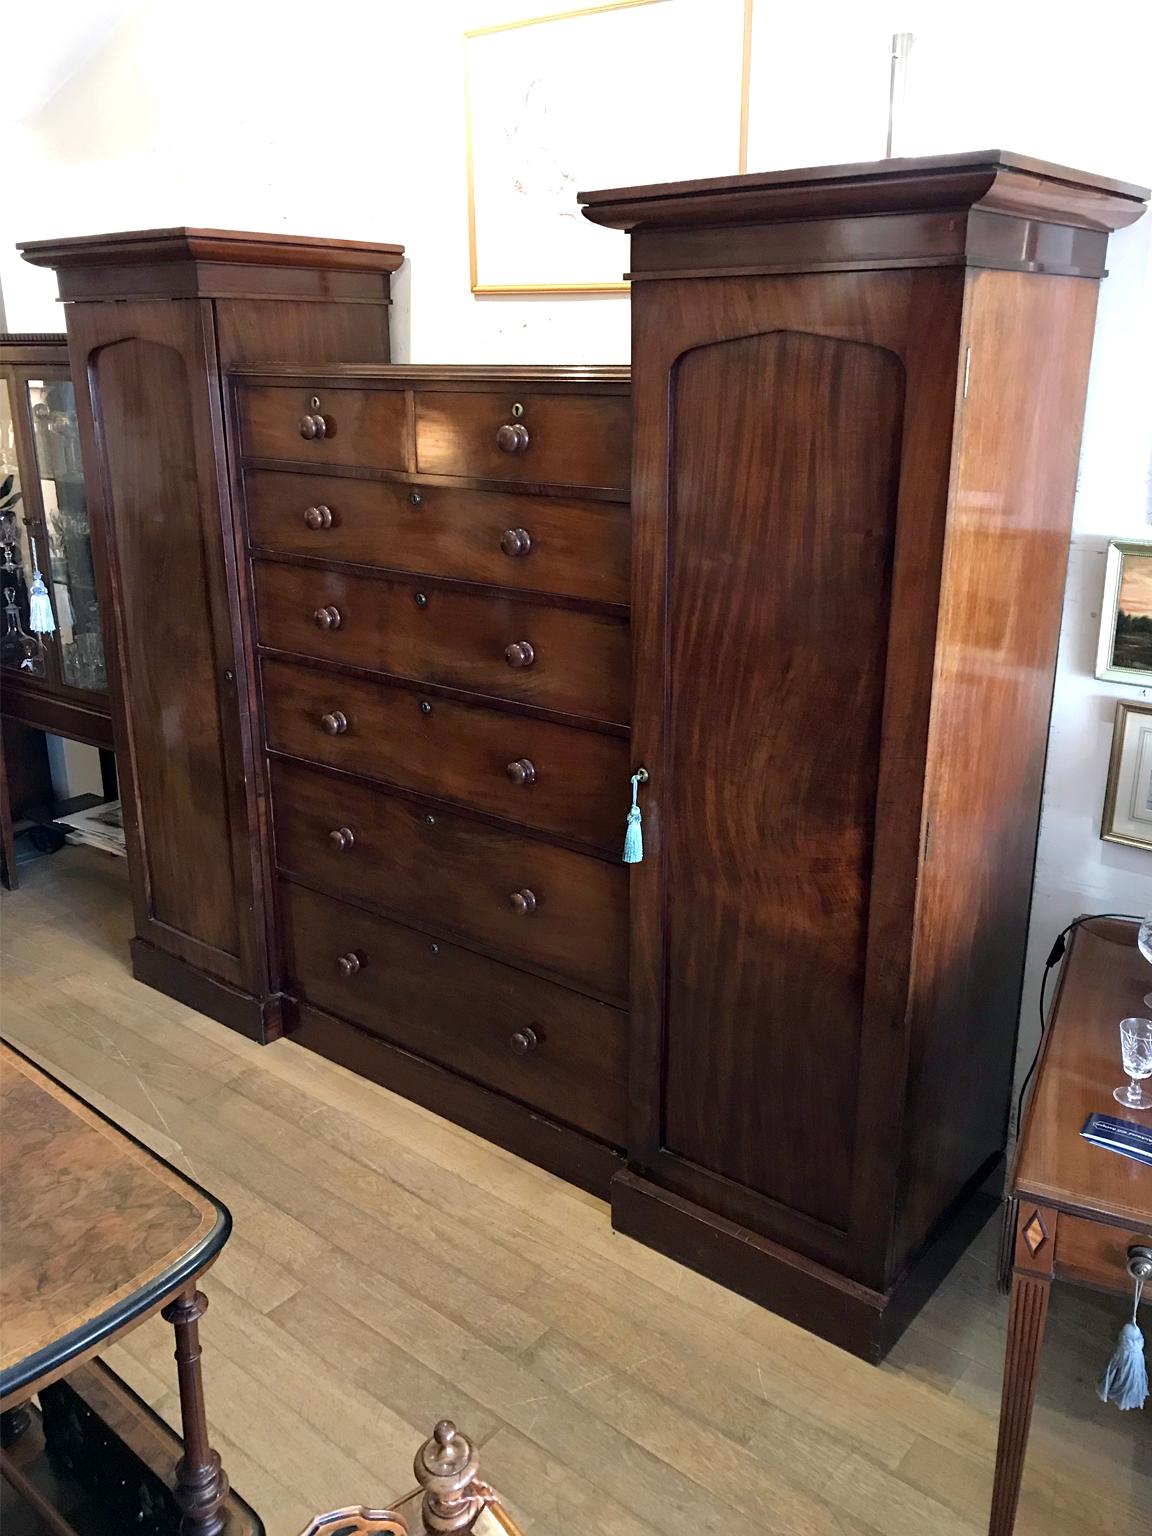 19th century mahogany Sentry wardrobe with two short and five long drawers with bun handles. Two side full length cupboards with hanging space on a plinth base. Comes apart in four sections,

circa 1850 - 1860.

Dimensions:

Width 87.5 inches